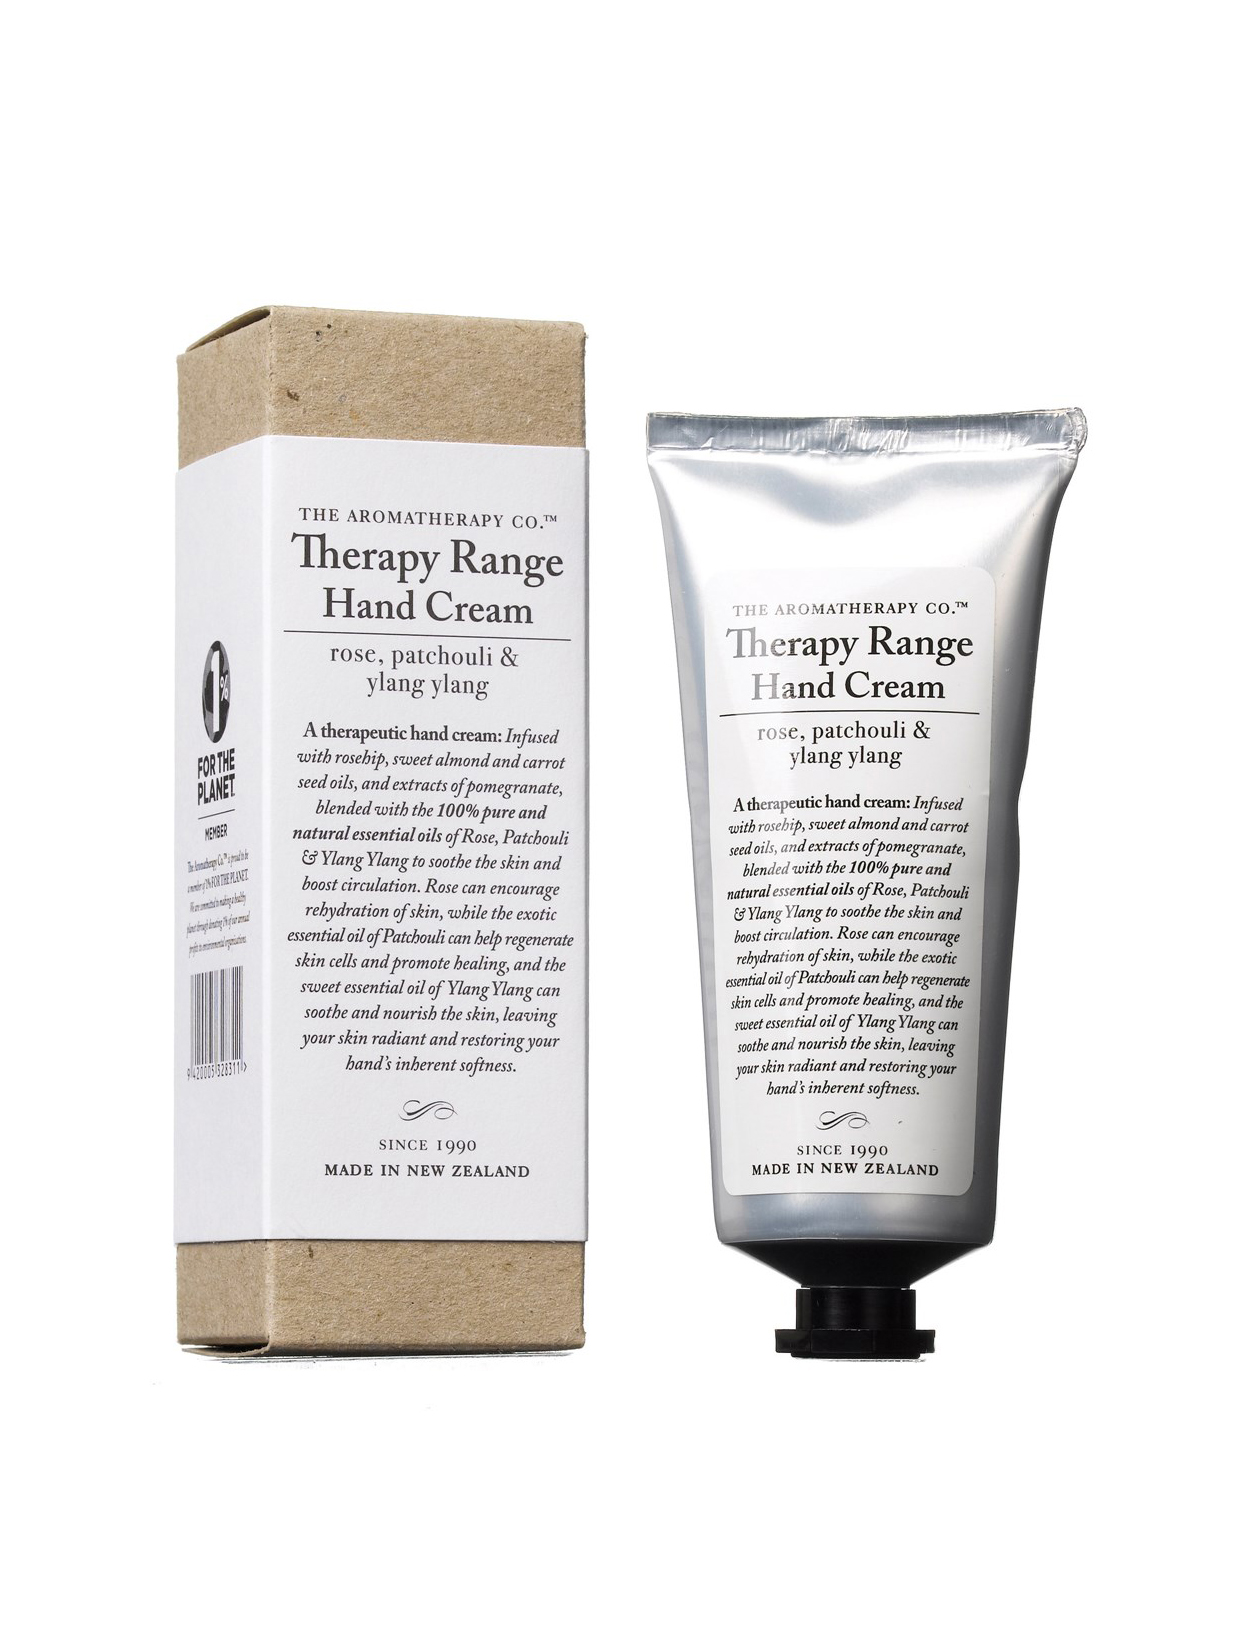 The Aromatherapy Co Hand Cream, Rose Patchouli and Ylang Ylang, $19.99, from Farmers